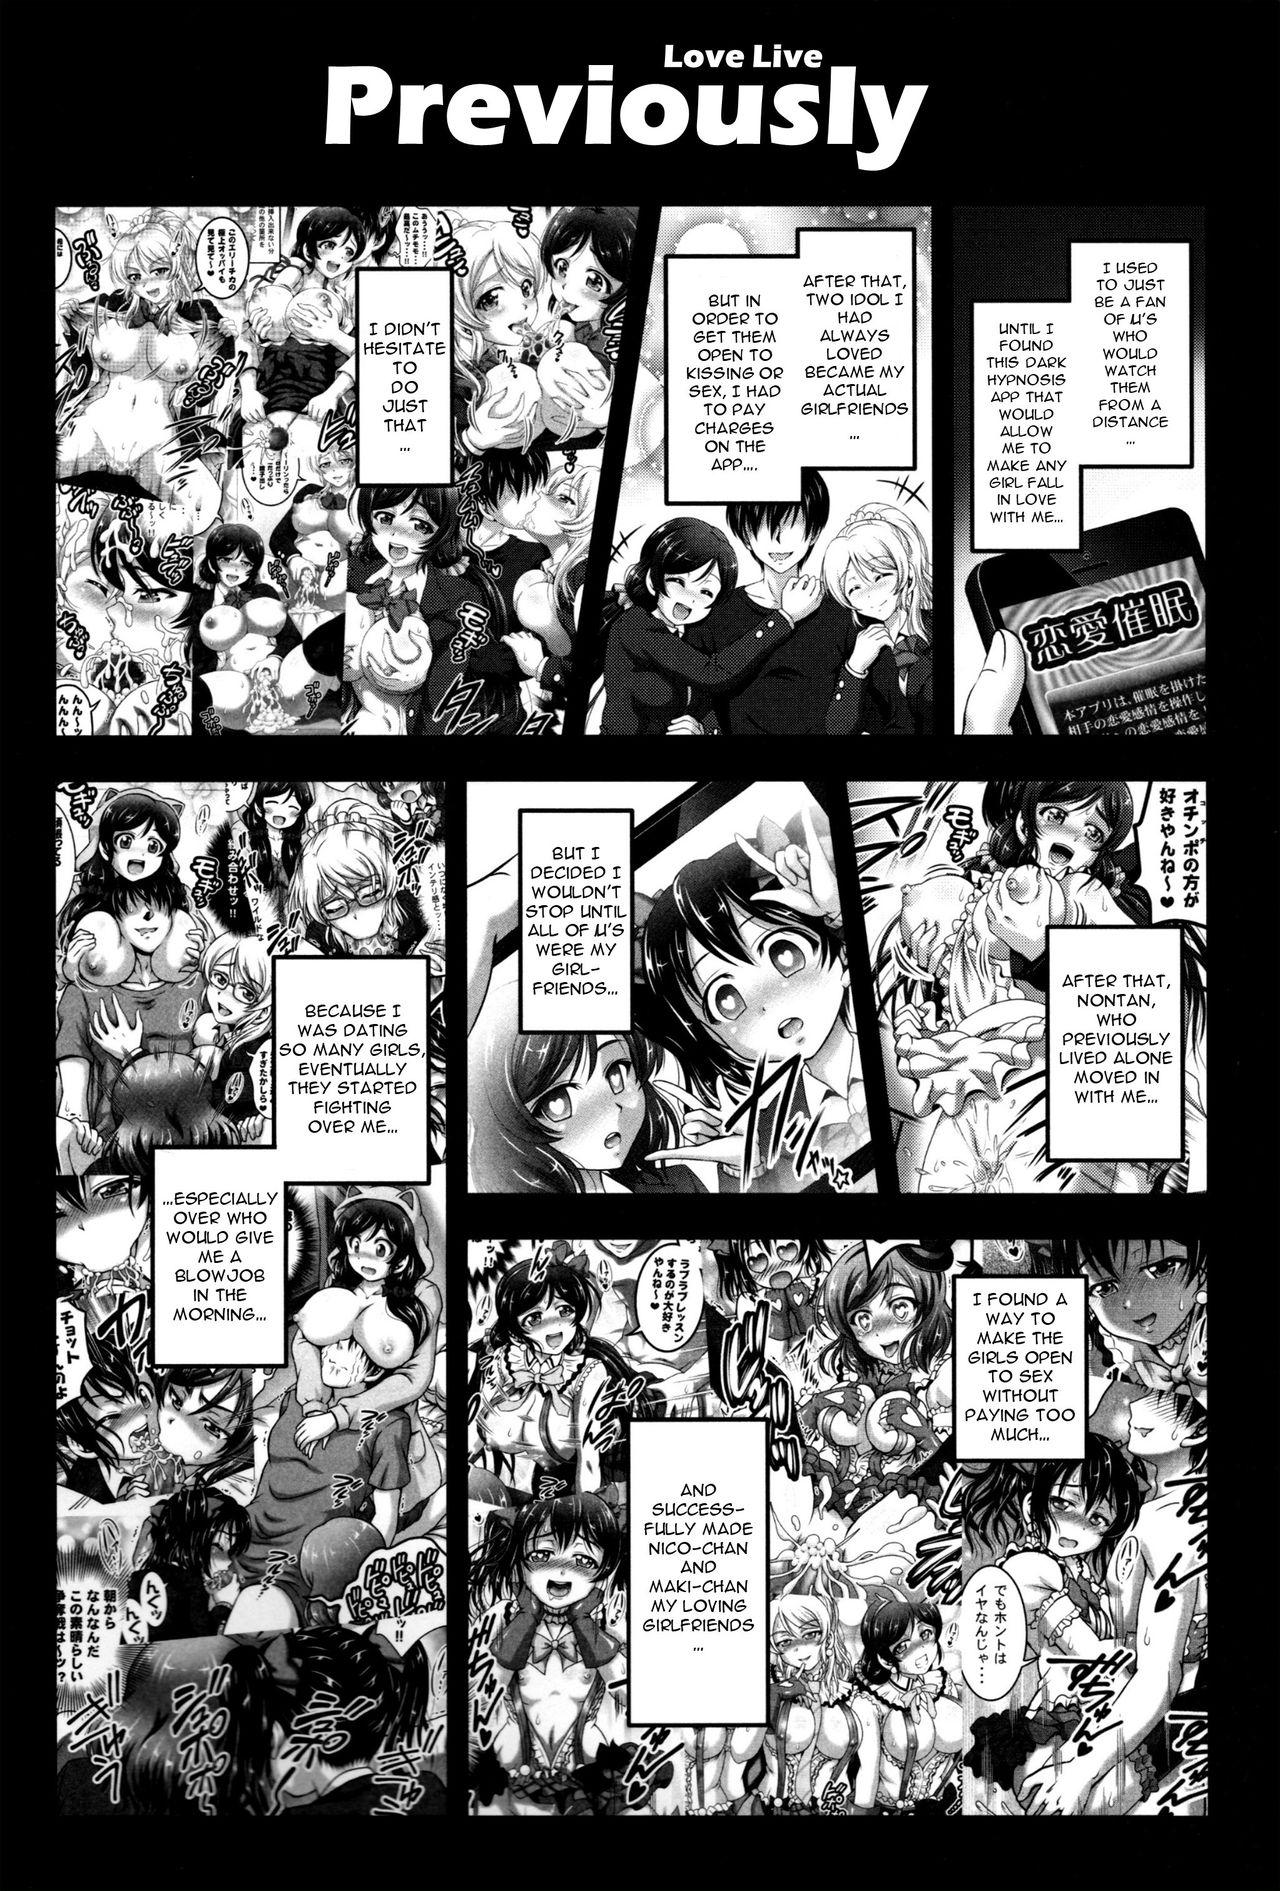 Spooning Ore Yome Saimin 6 - Love live Gay Longhair - Page 3